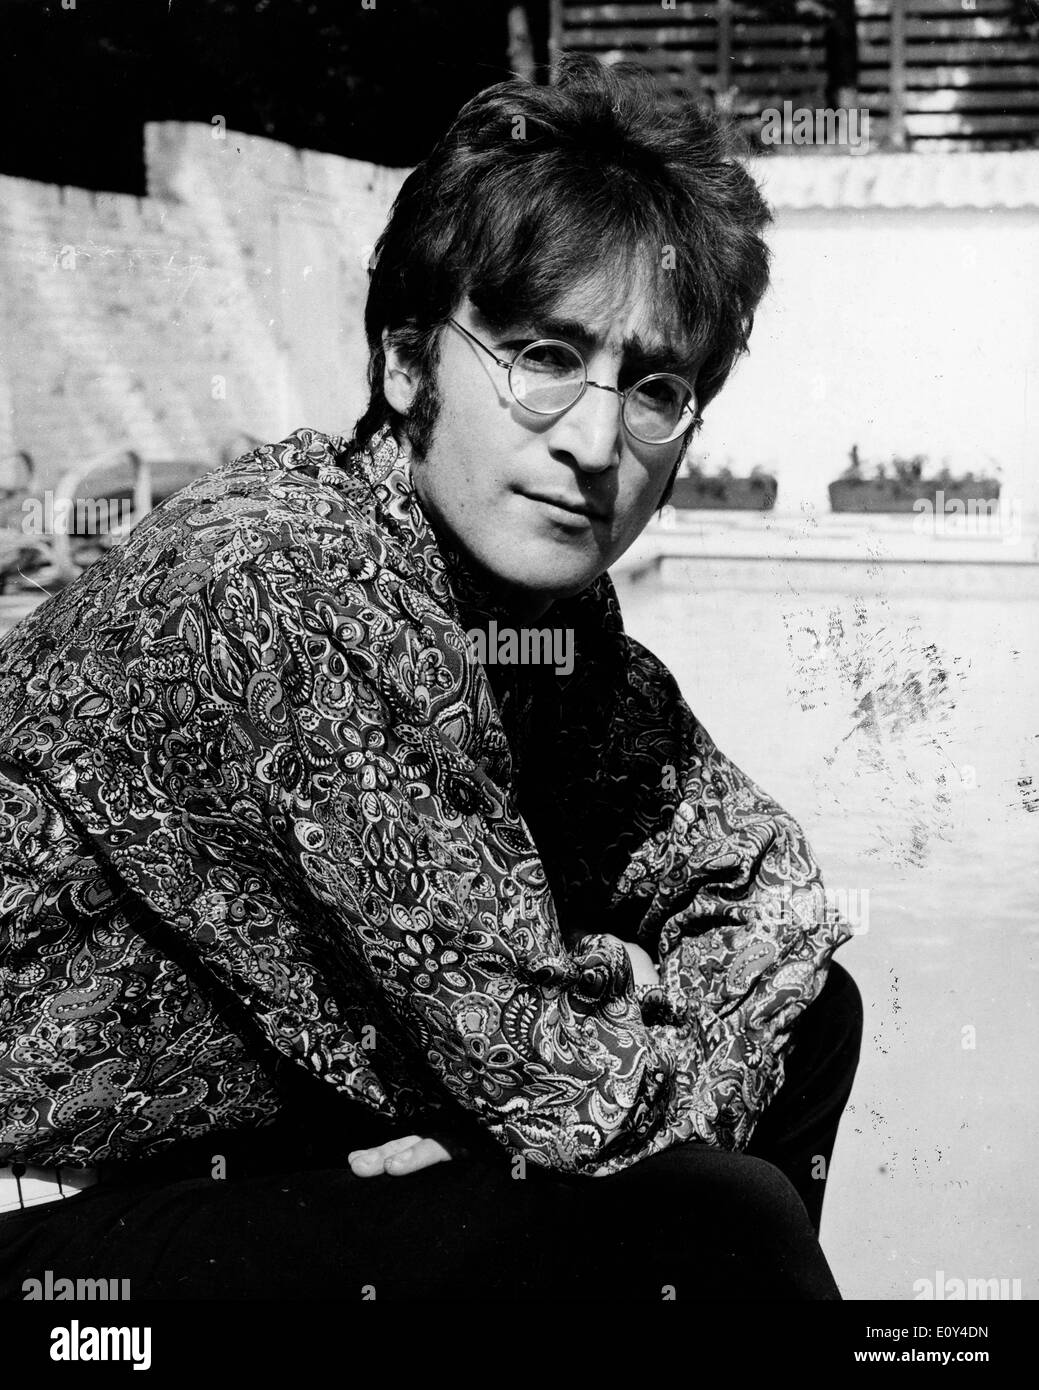 July 24, 1968 - London, England, United Kingdom - Singer/Songwriter JOHN LENNON (1940-1980) member of The Beatles relaxing at his home. Today marks the 25th anniversary of the death of JOHN WINSTON LENNON. He was born on Oct. 9th, 1940 in Liverpool and was best known as a singer, songwriter, poet and guitarist for The Beatles. He is recognized as one of the greatest musical icons of the 20th century. On the evening of Dec. 8th, 1980, in New York City, deranged fan Mark David Chapman shot Lennon 4 times in the back and shoulder Stock Photo